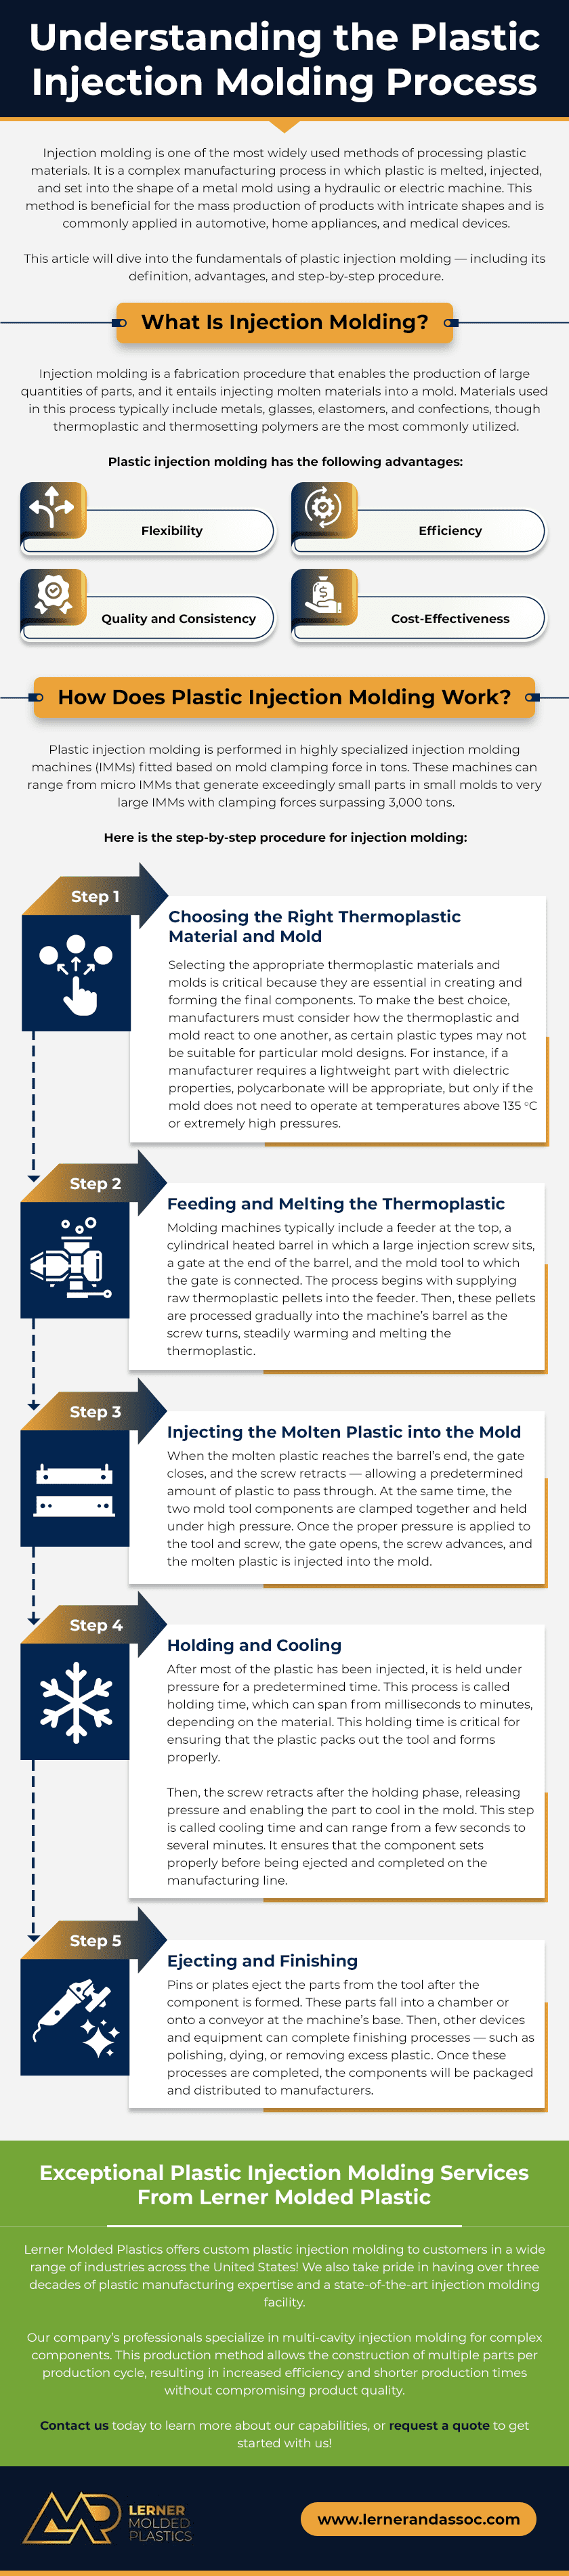 Understanding the Plastic Injection Molding Process